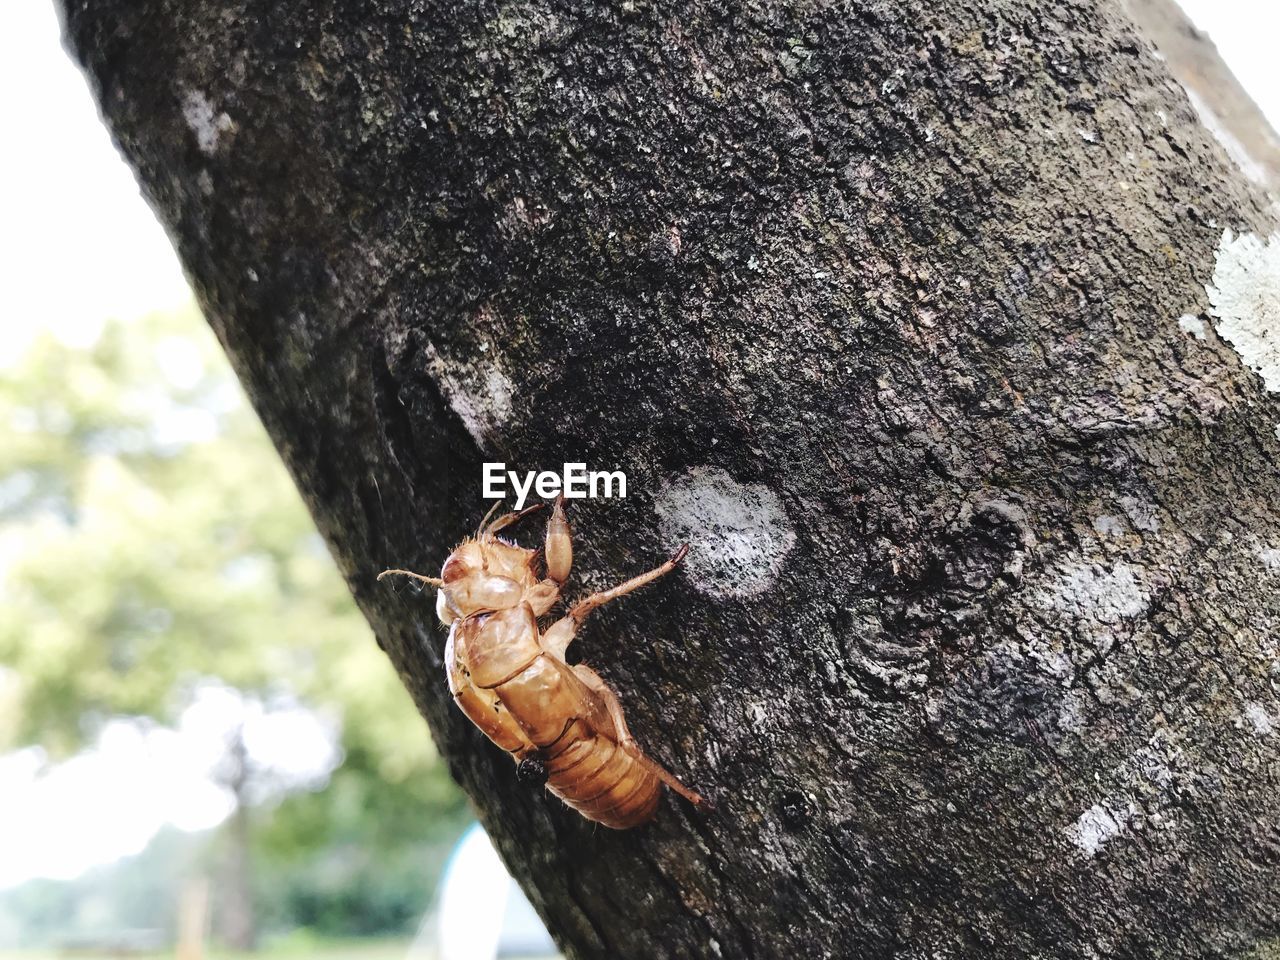 INSECT ON TREE TRUNK